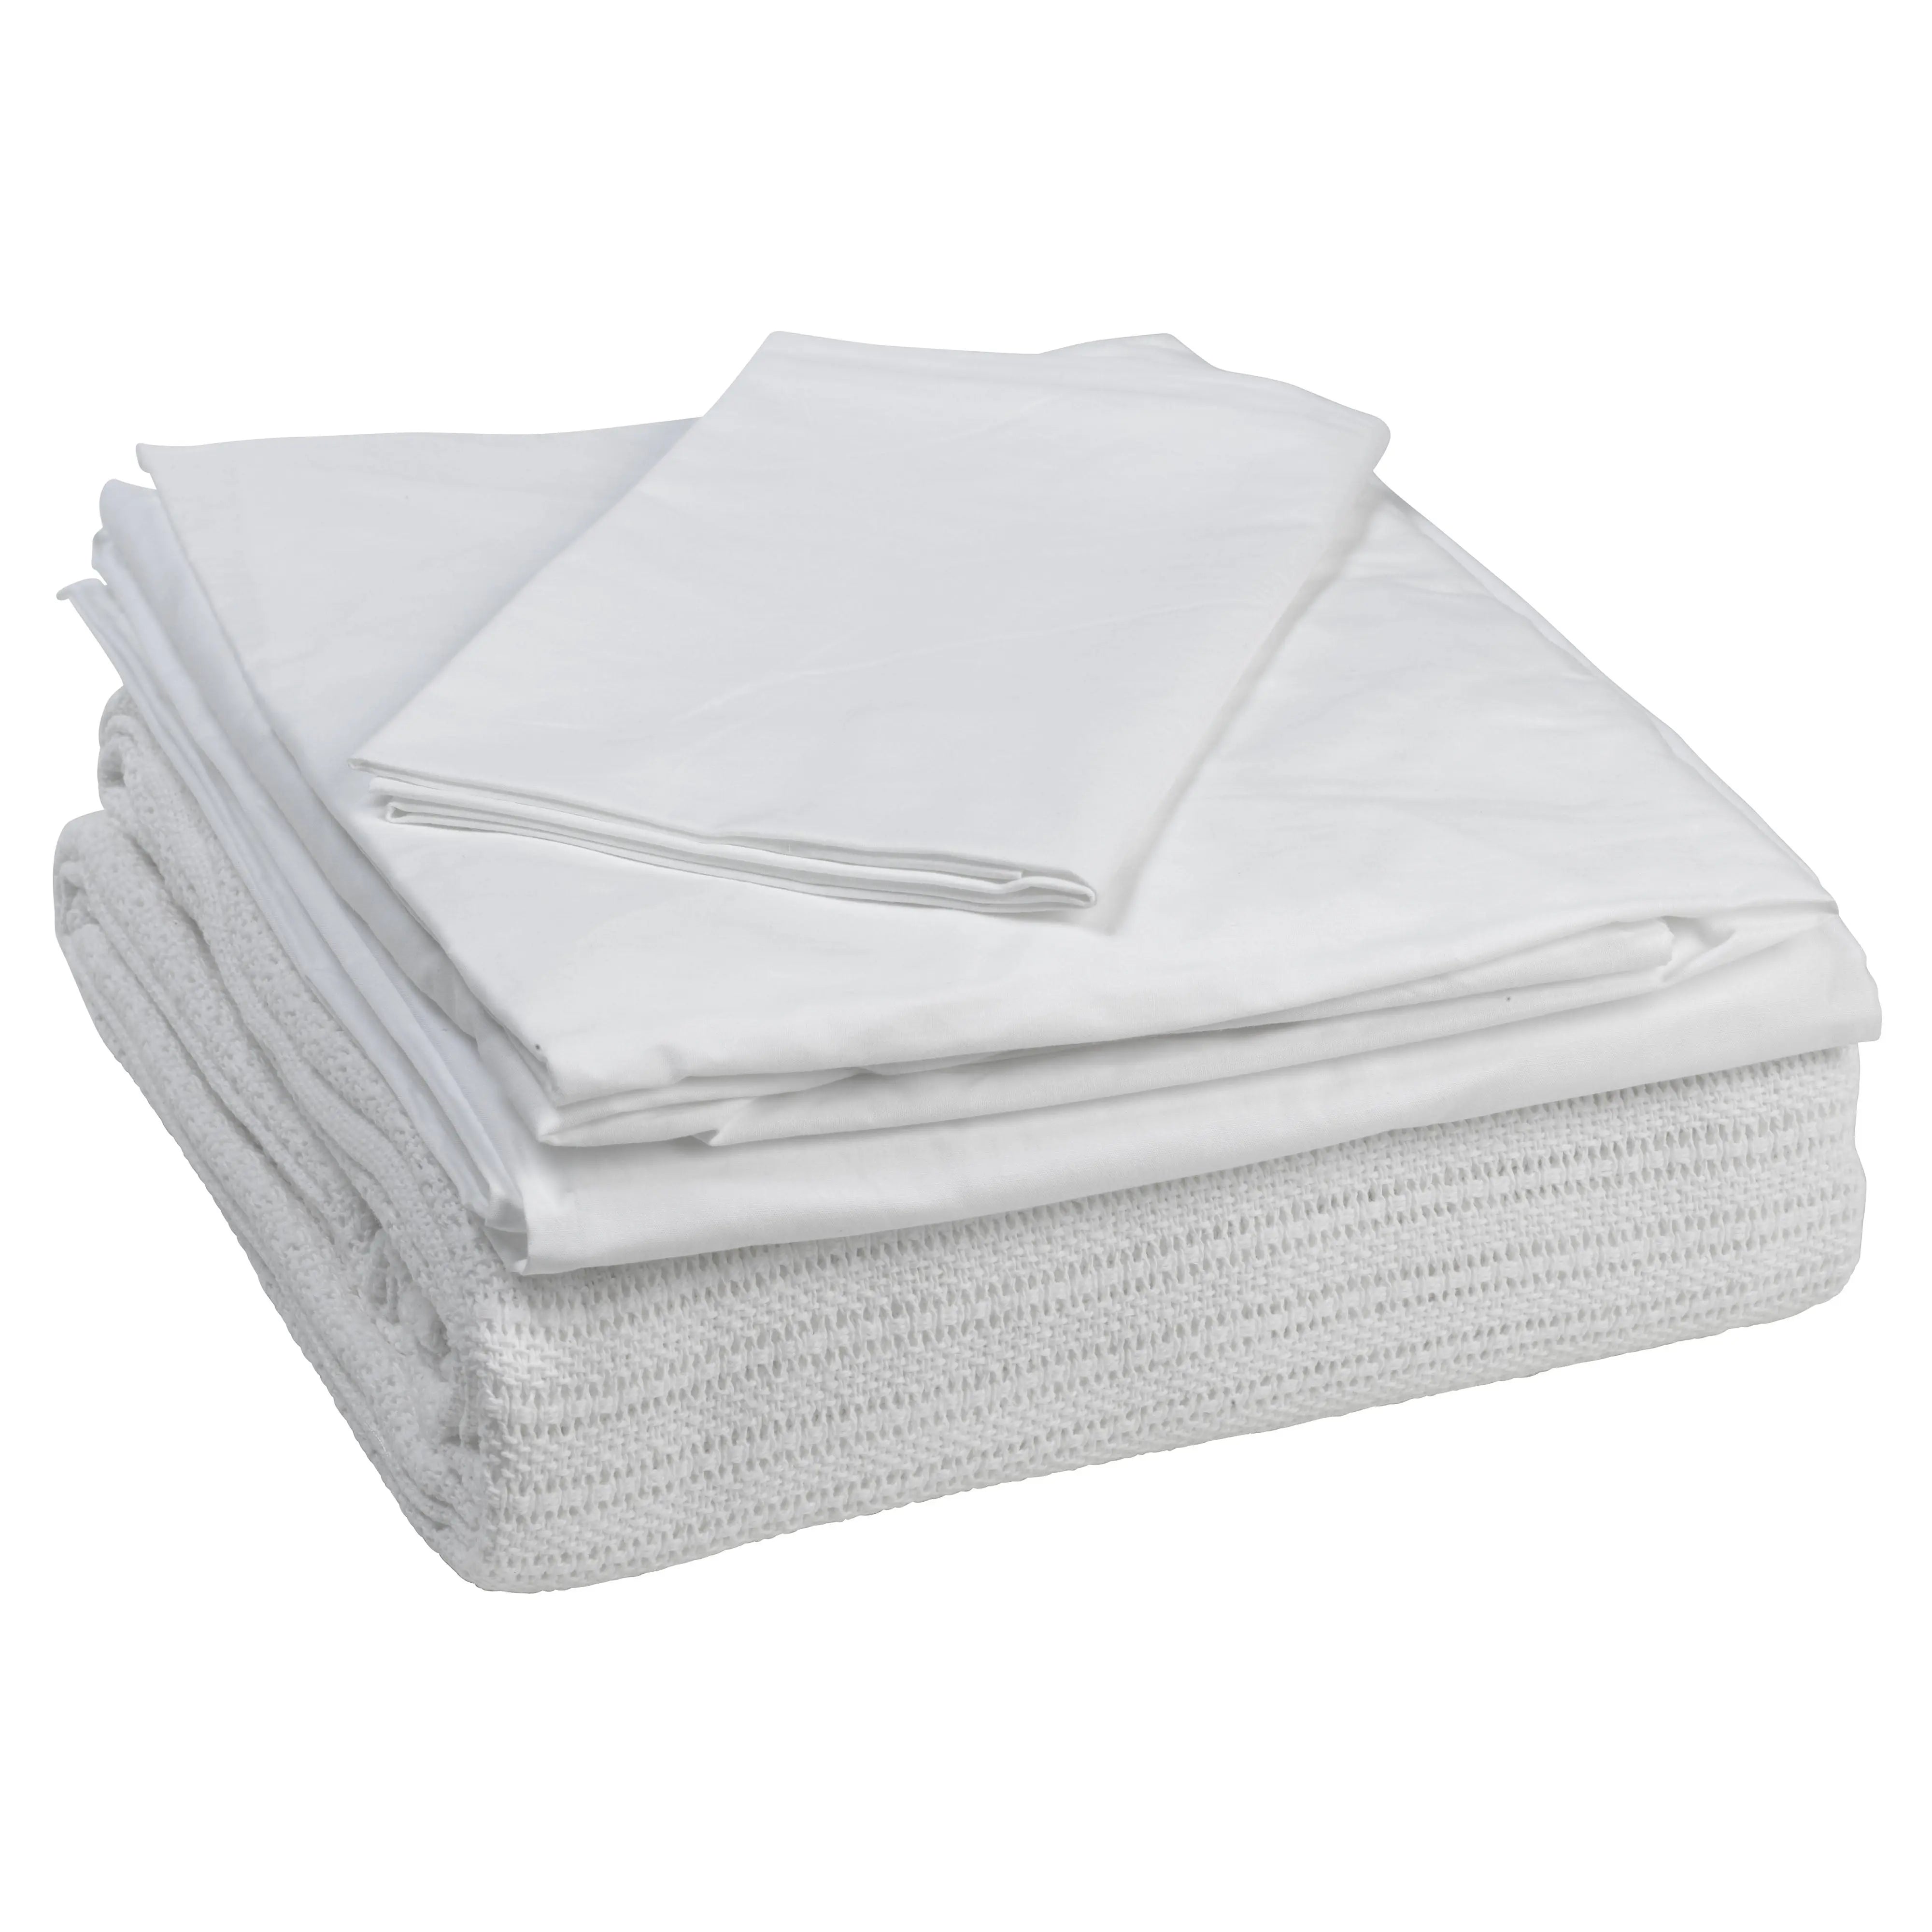 Hospital Bed Bedding in a Box - Home Health Store Inc